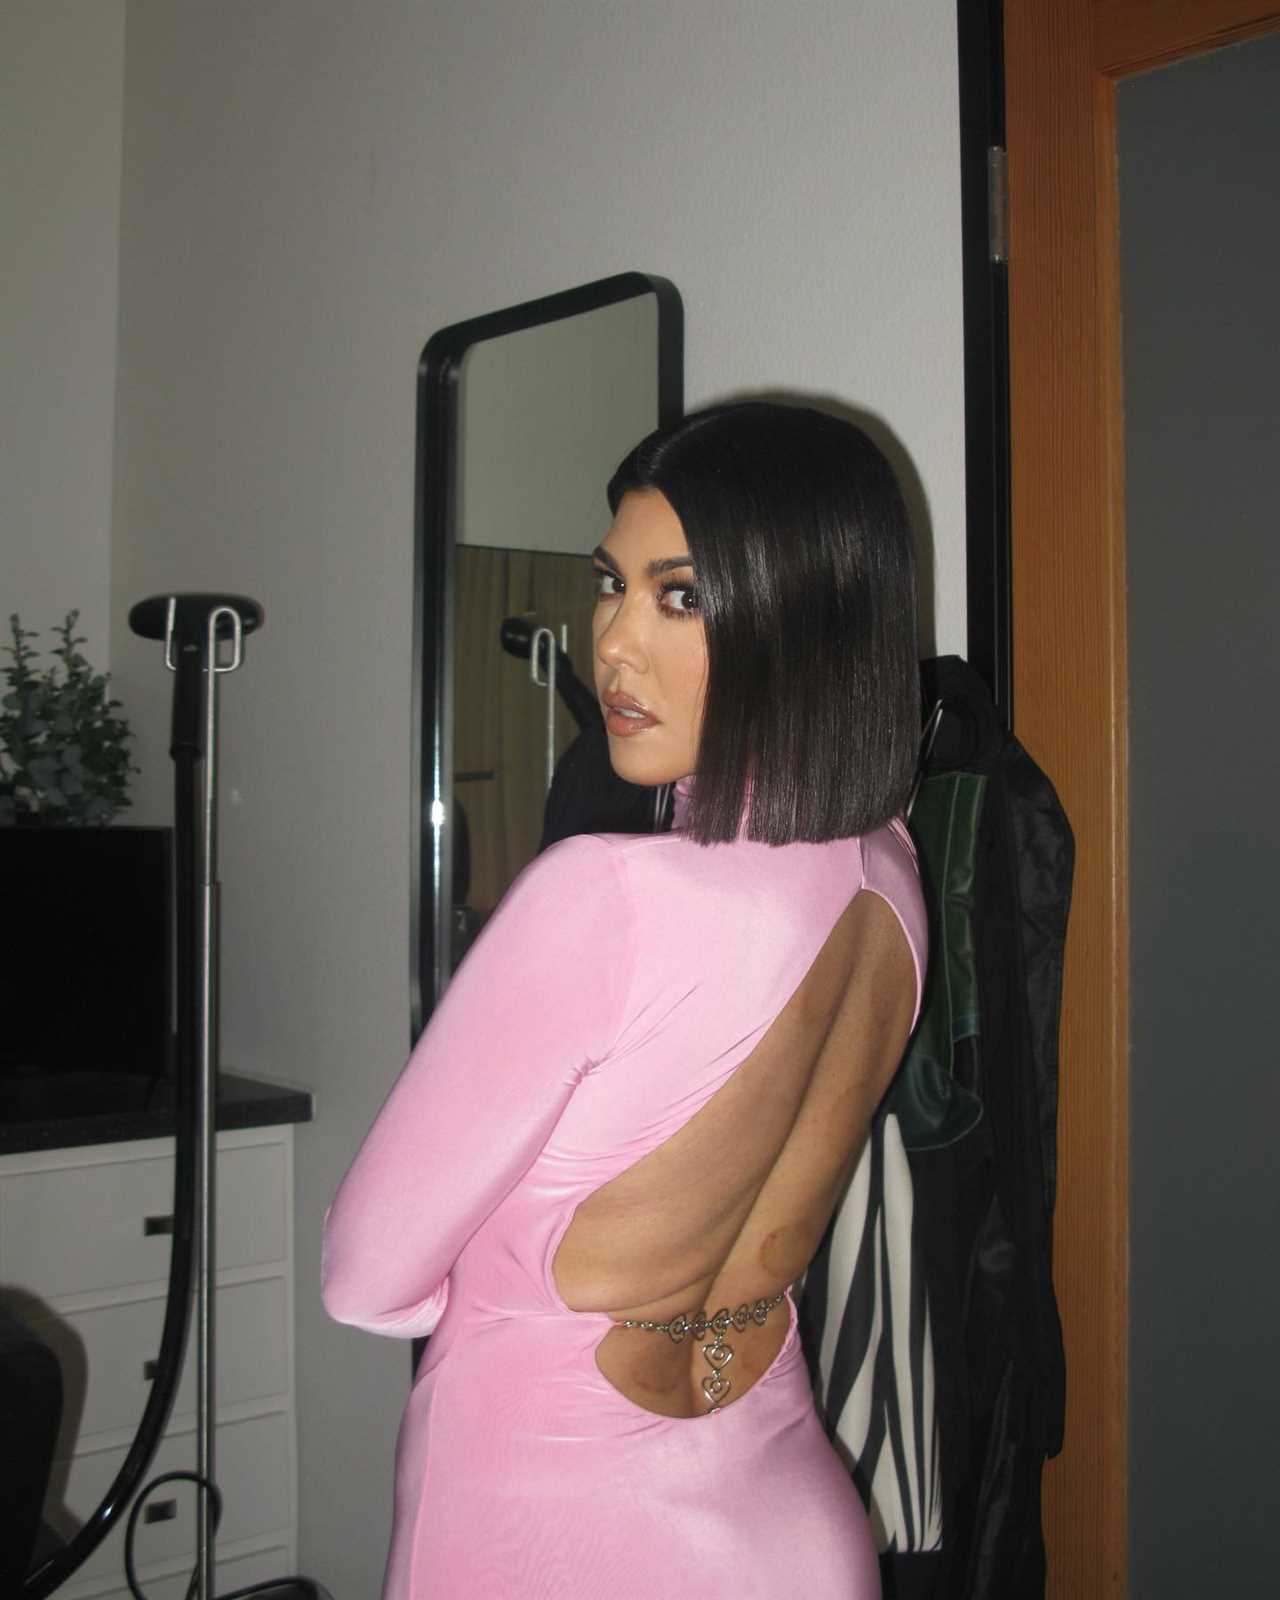 Kourtney Kardashian praised for ‘normalizing’ having a ‘real’ body and hips in unedited new photo